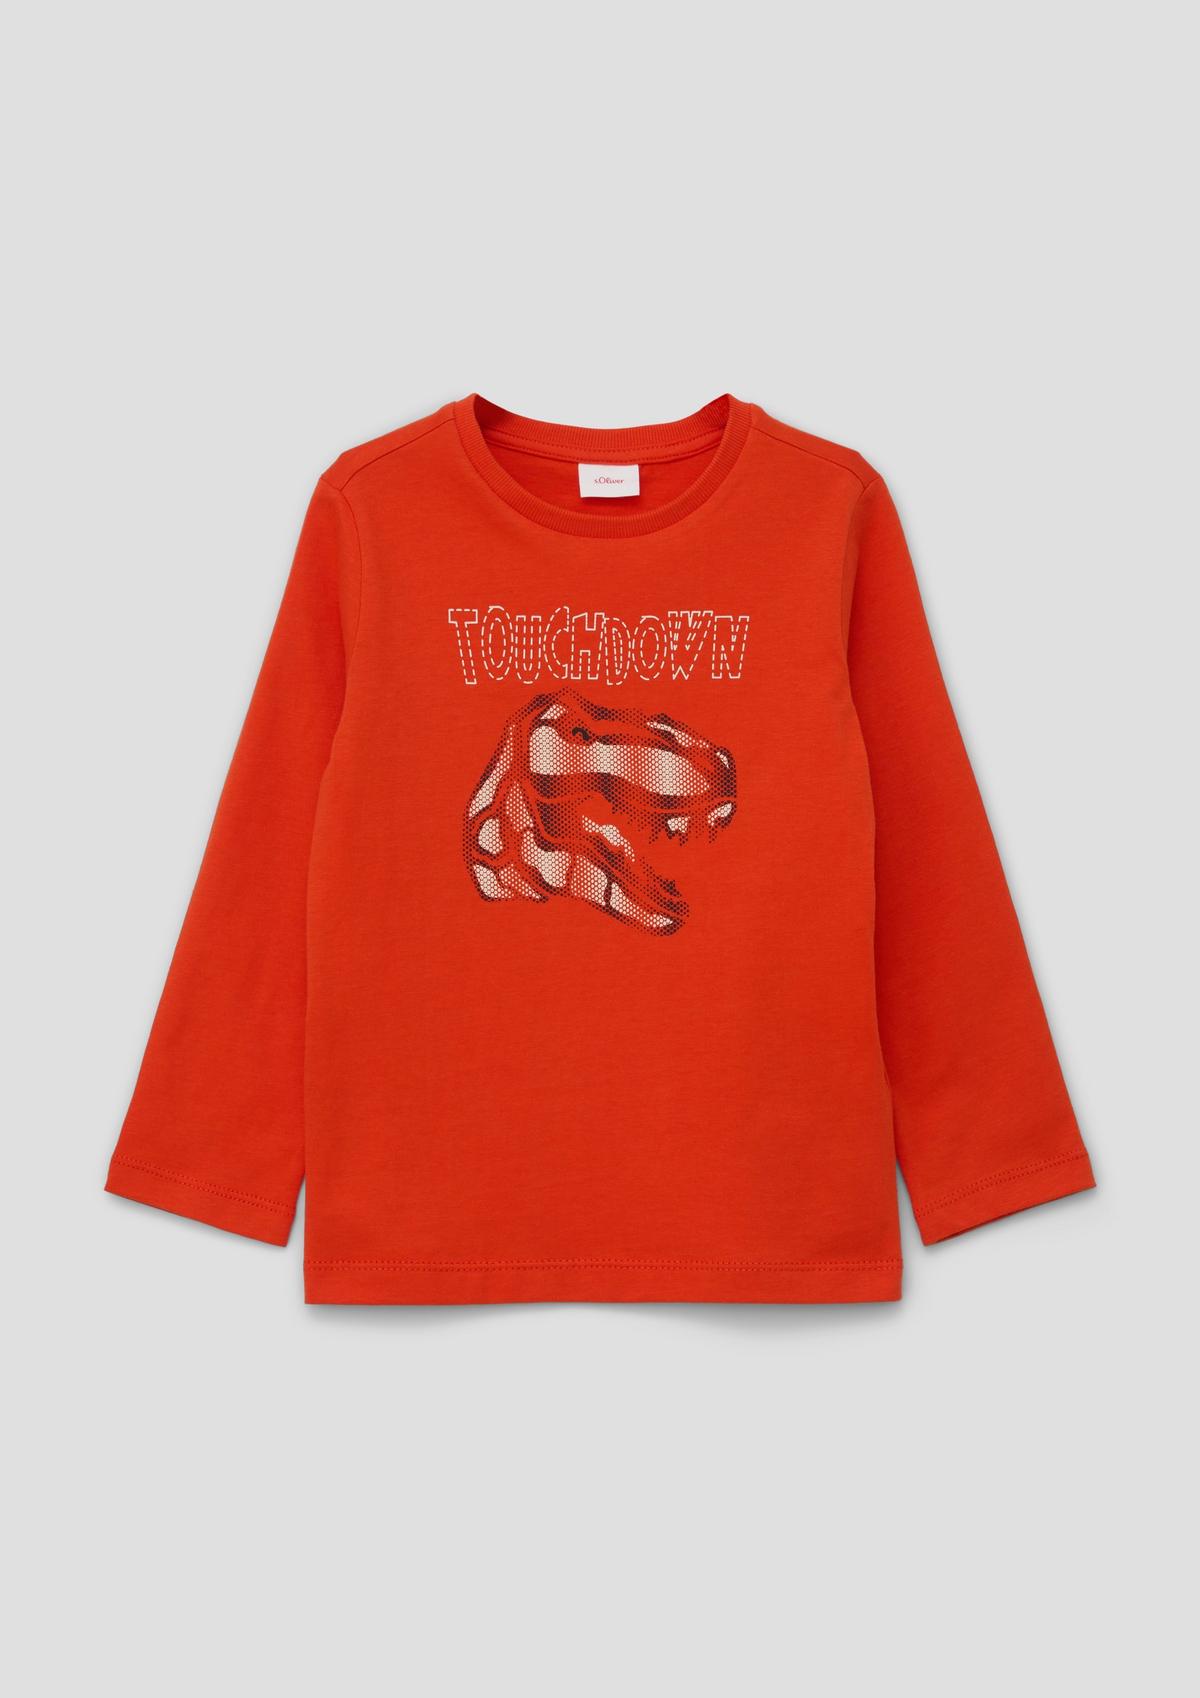 s.Oliver Long sleeve top with a dinosaur motif